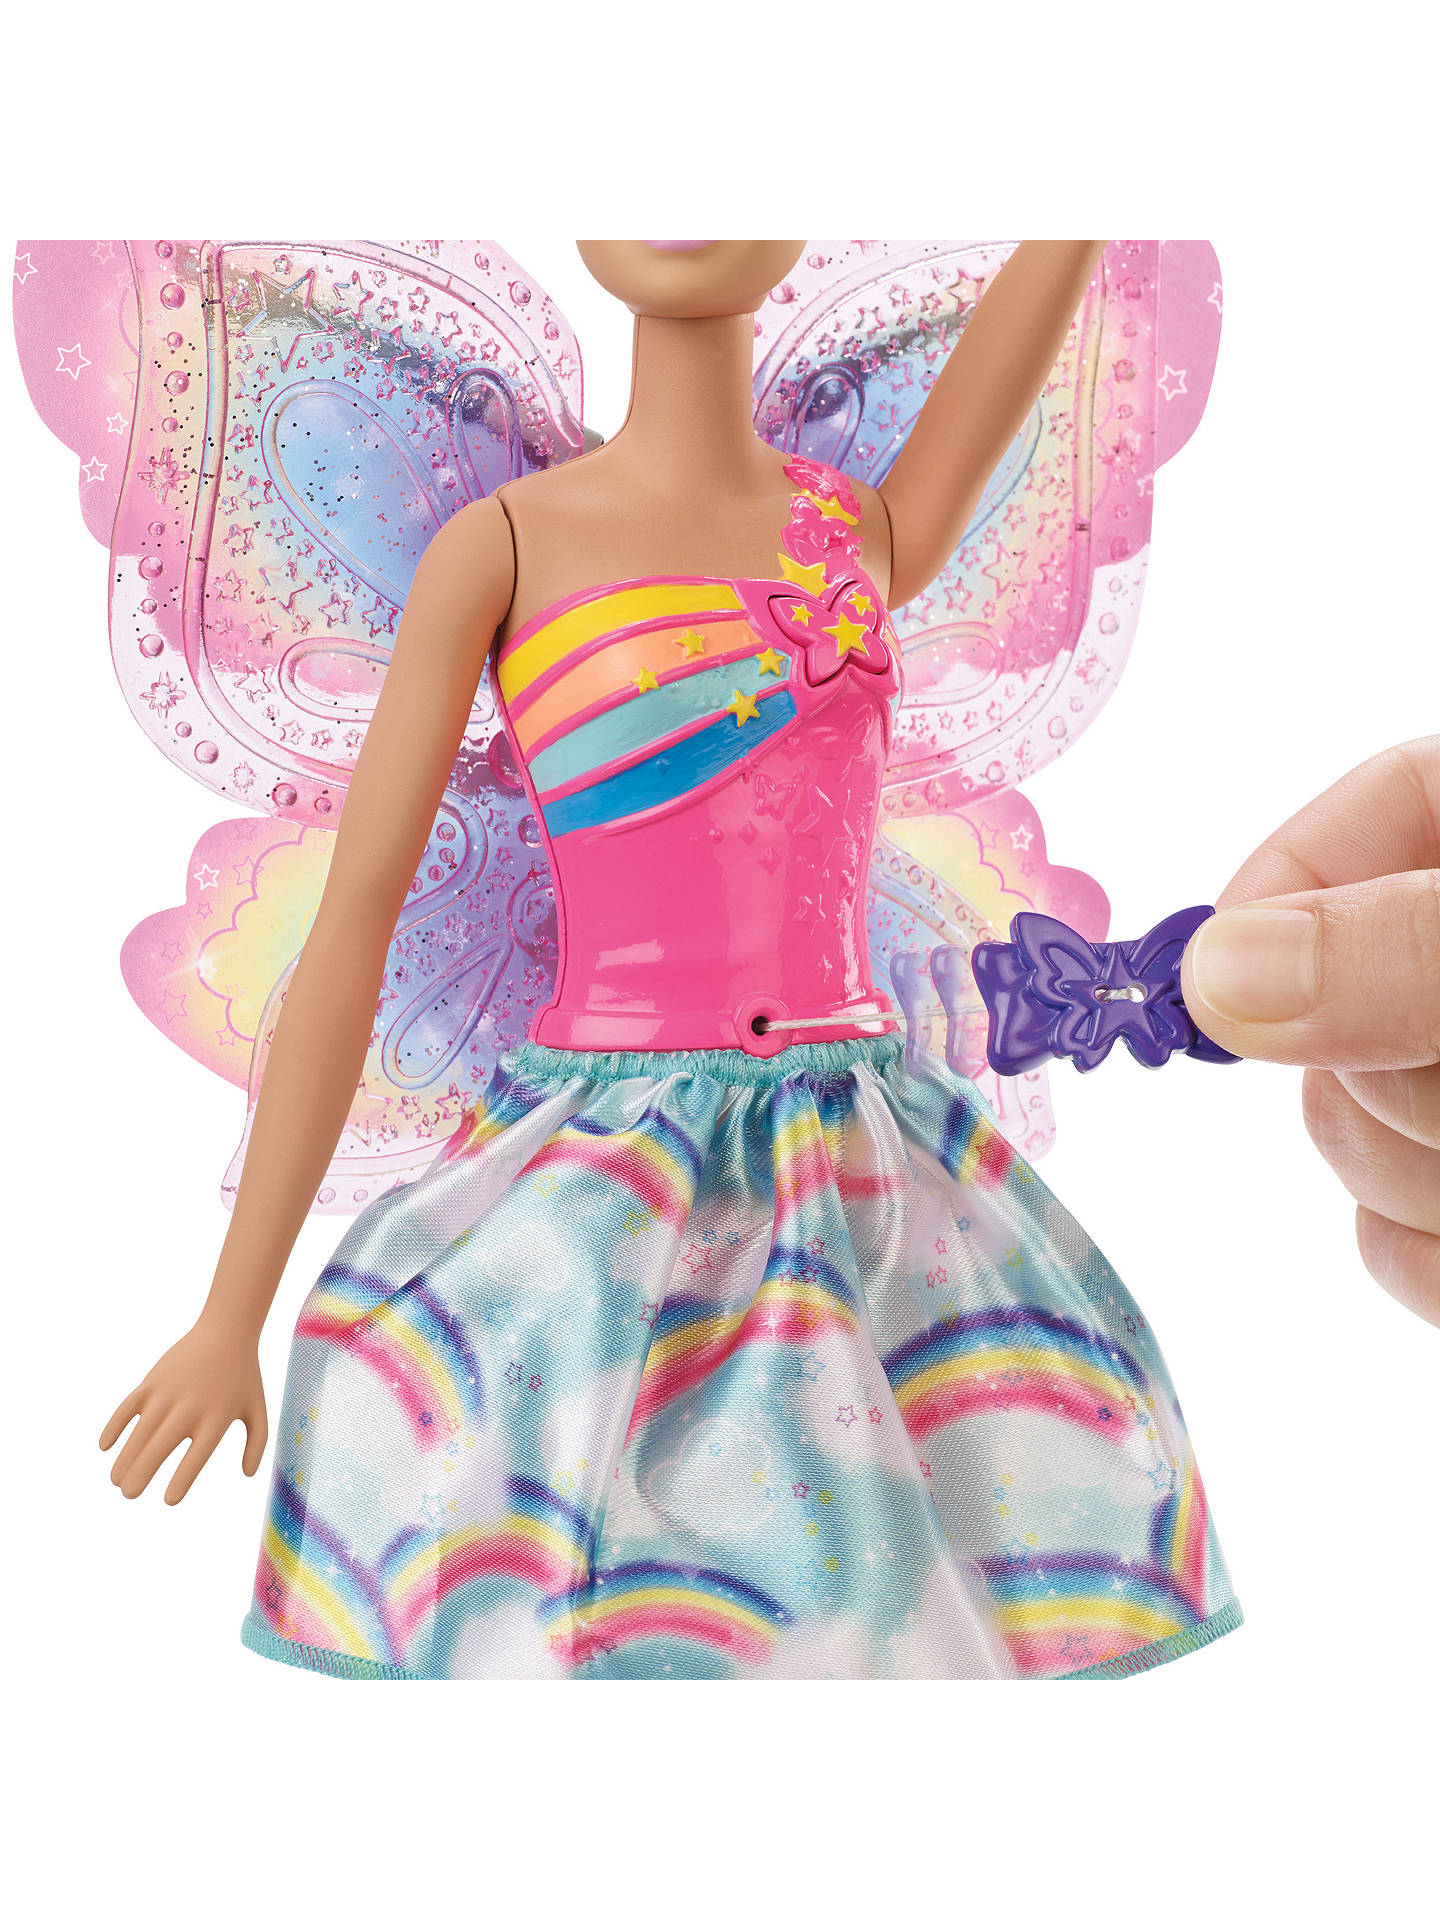 Barbie Dreamtopia Flying Wings Fairy Doll At John Lewis And Partners